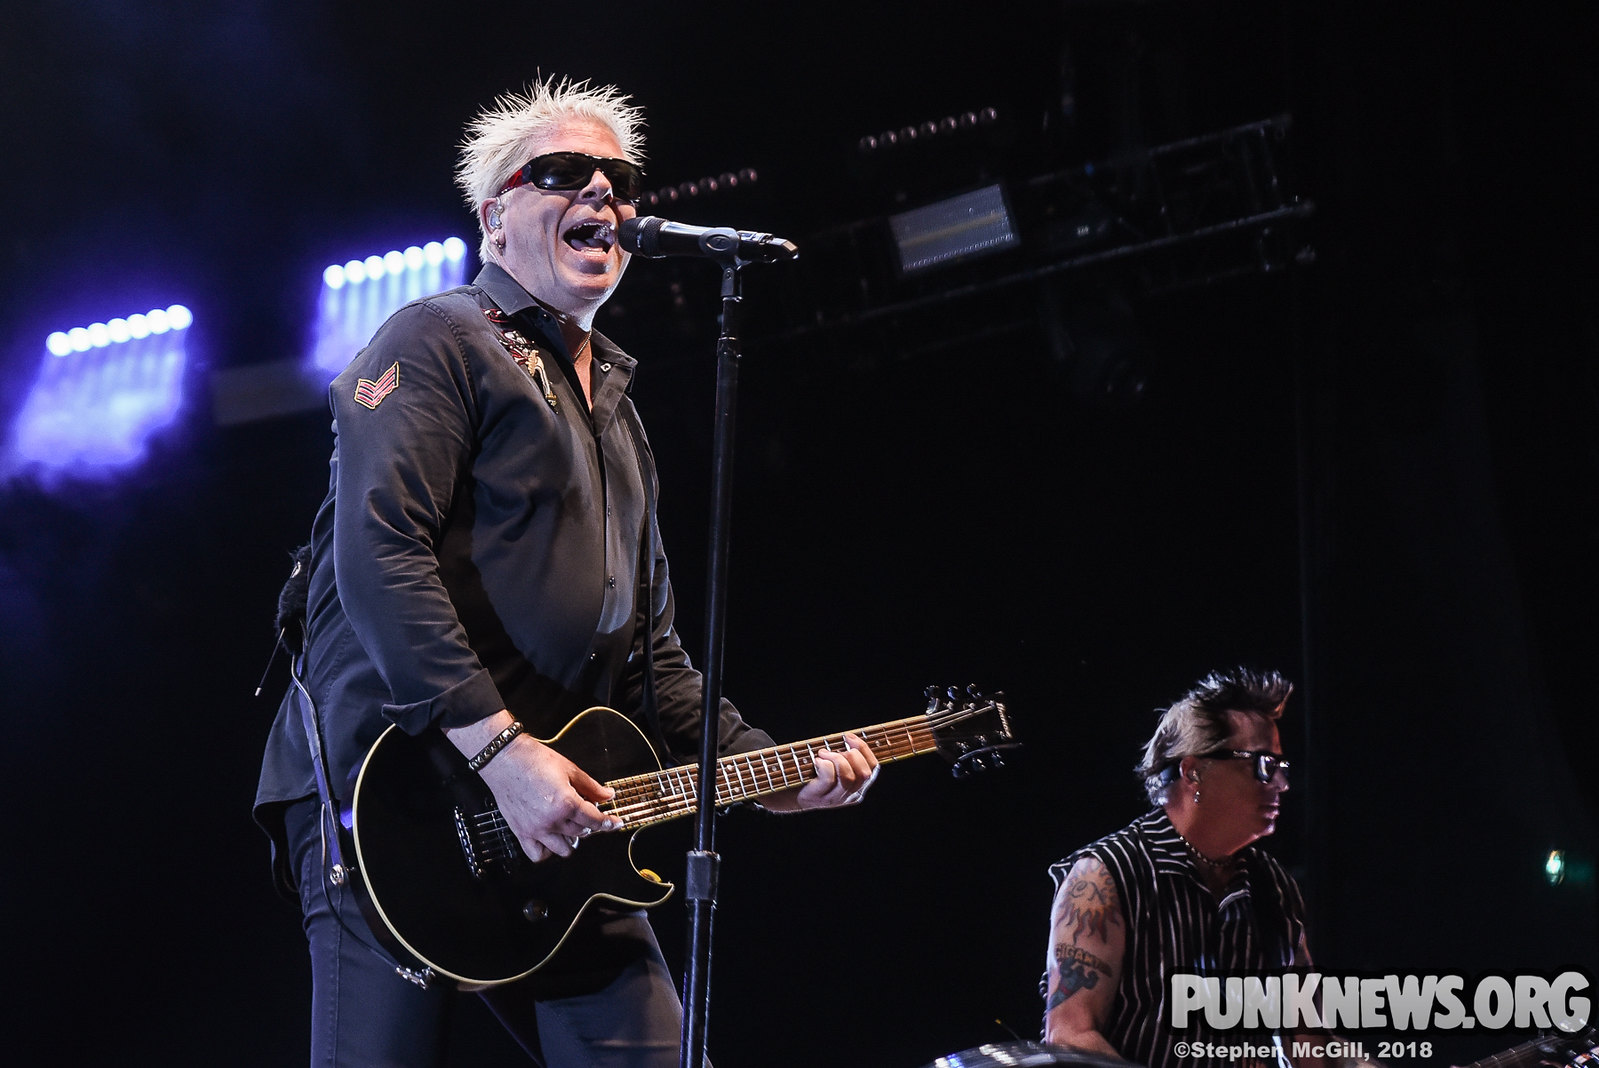 The Offspring at Budweiser Stage, 08/28